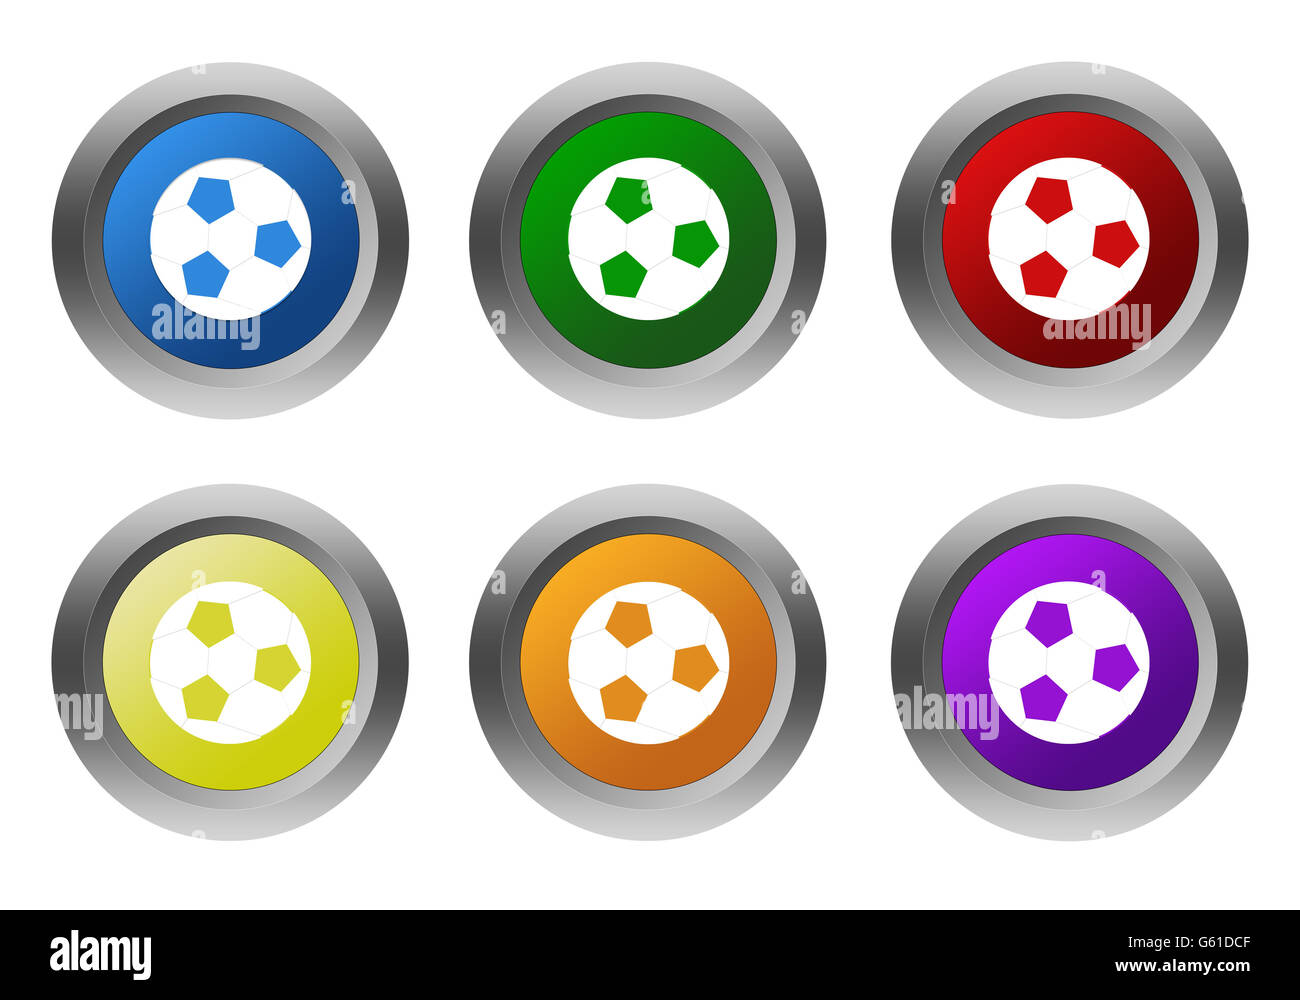 Set of colorful buttons with football symbol in blue, green, yellow, red, pink and orange colors Stock Photo